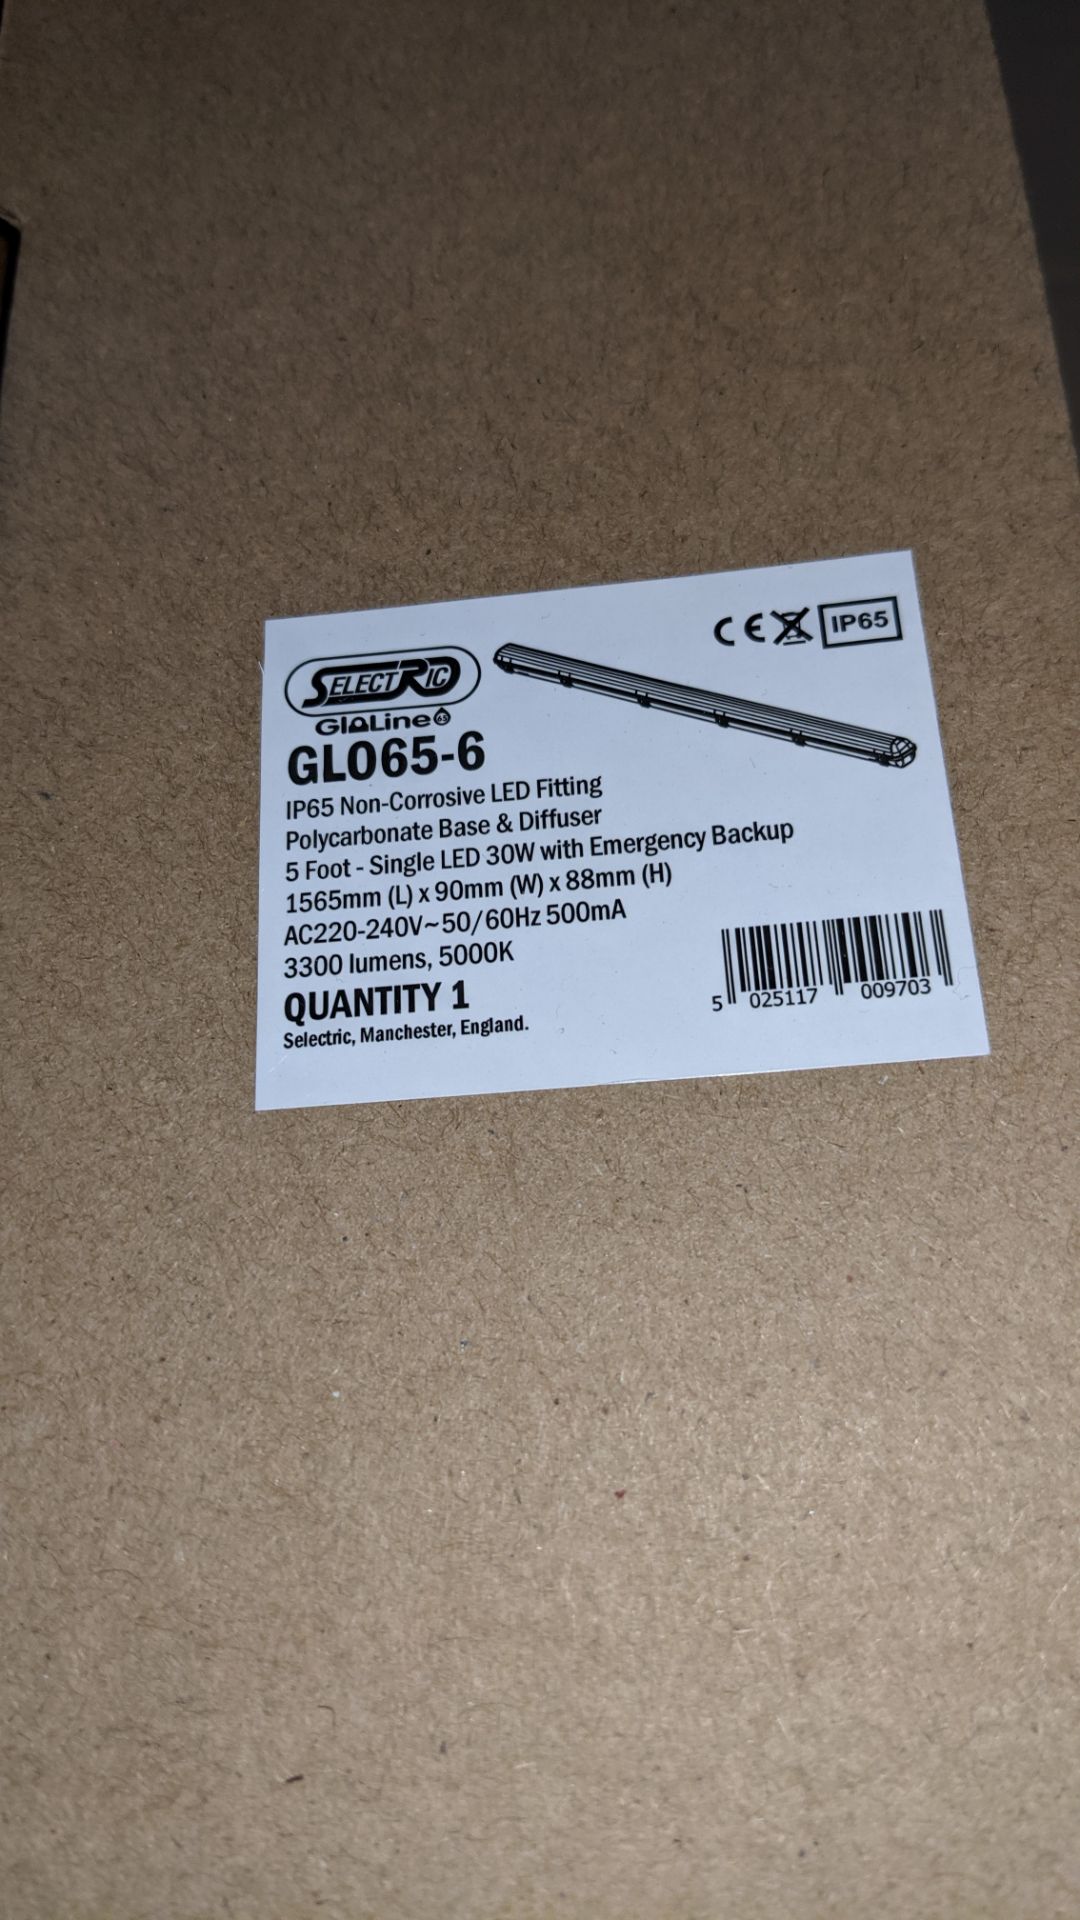 24 off IP65 non-corrosive LED fluorescent light fittings. Model GLO65-6, 5', single LED 30W (with e - Image 4 of 4